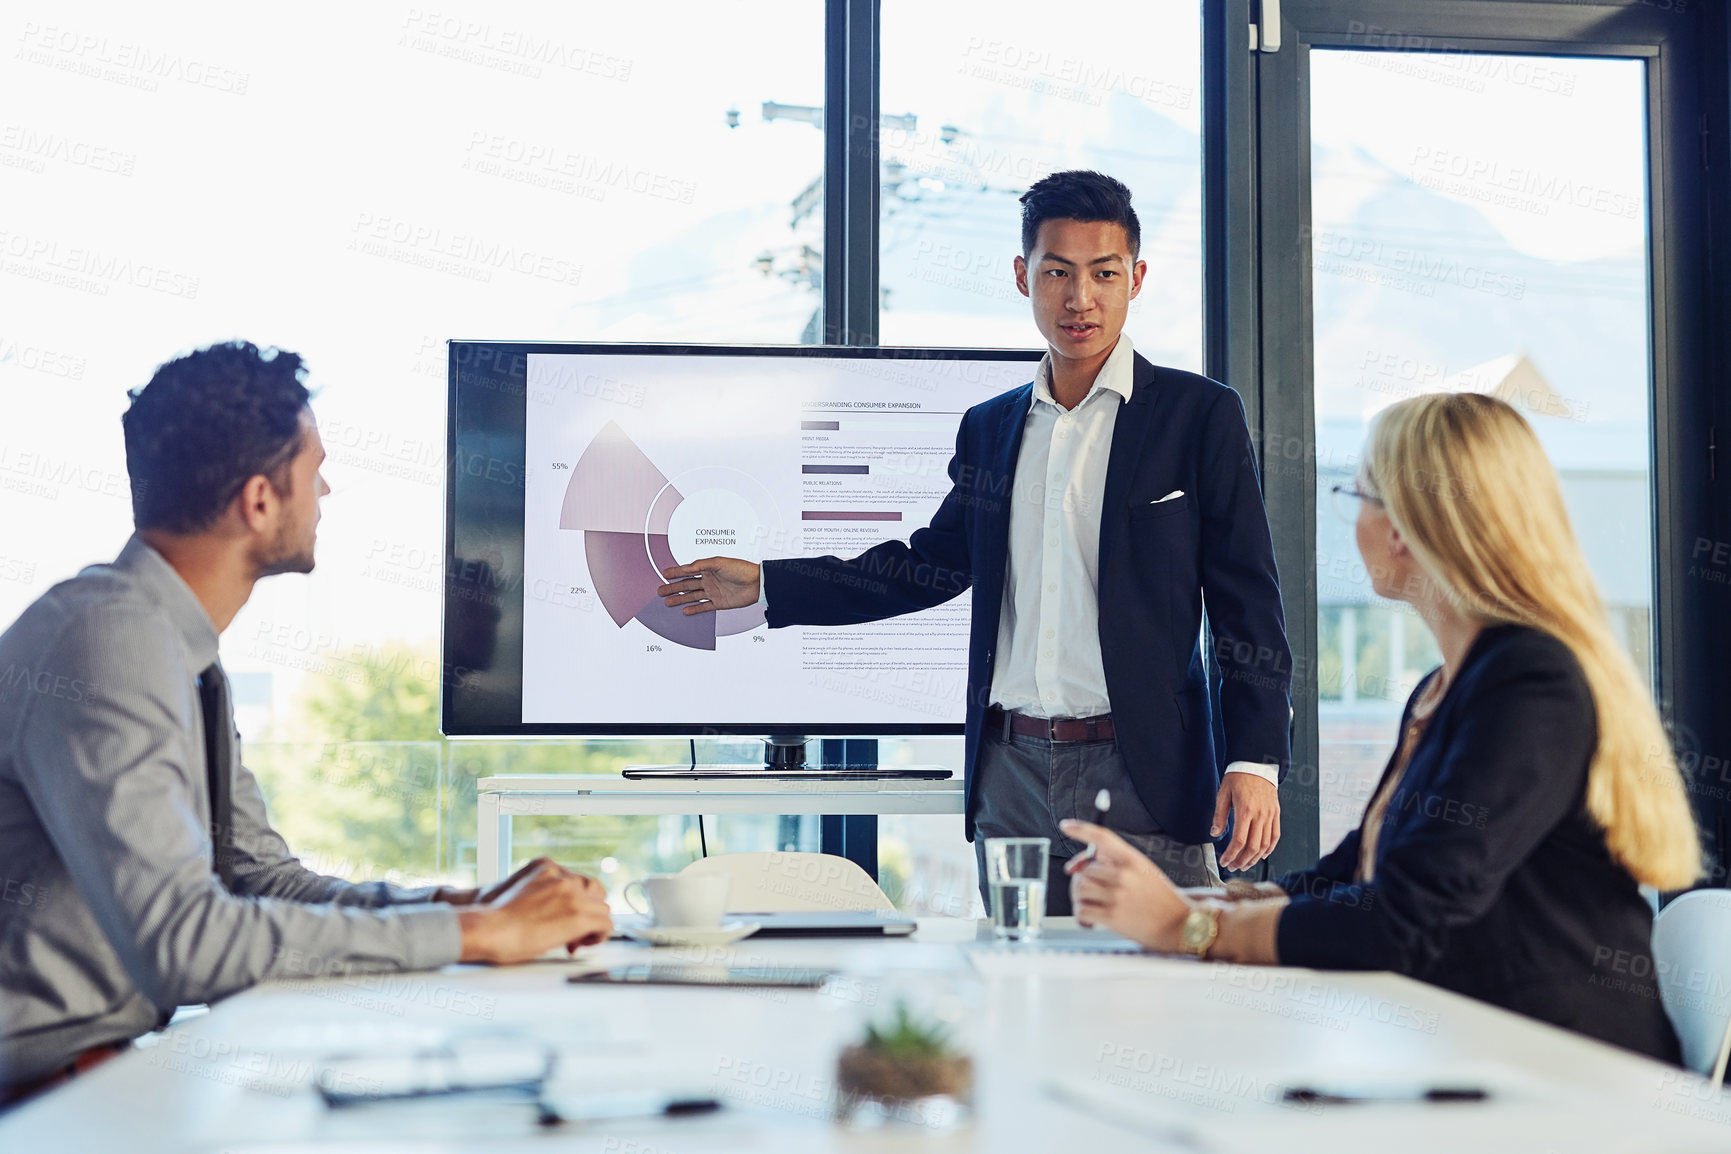 Buy stock photo Shot of a young businessman delivering a presentation to his colleagues in the boardroom of a modern office